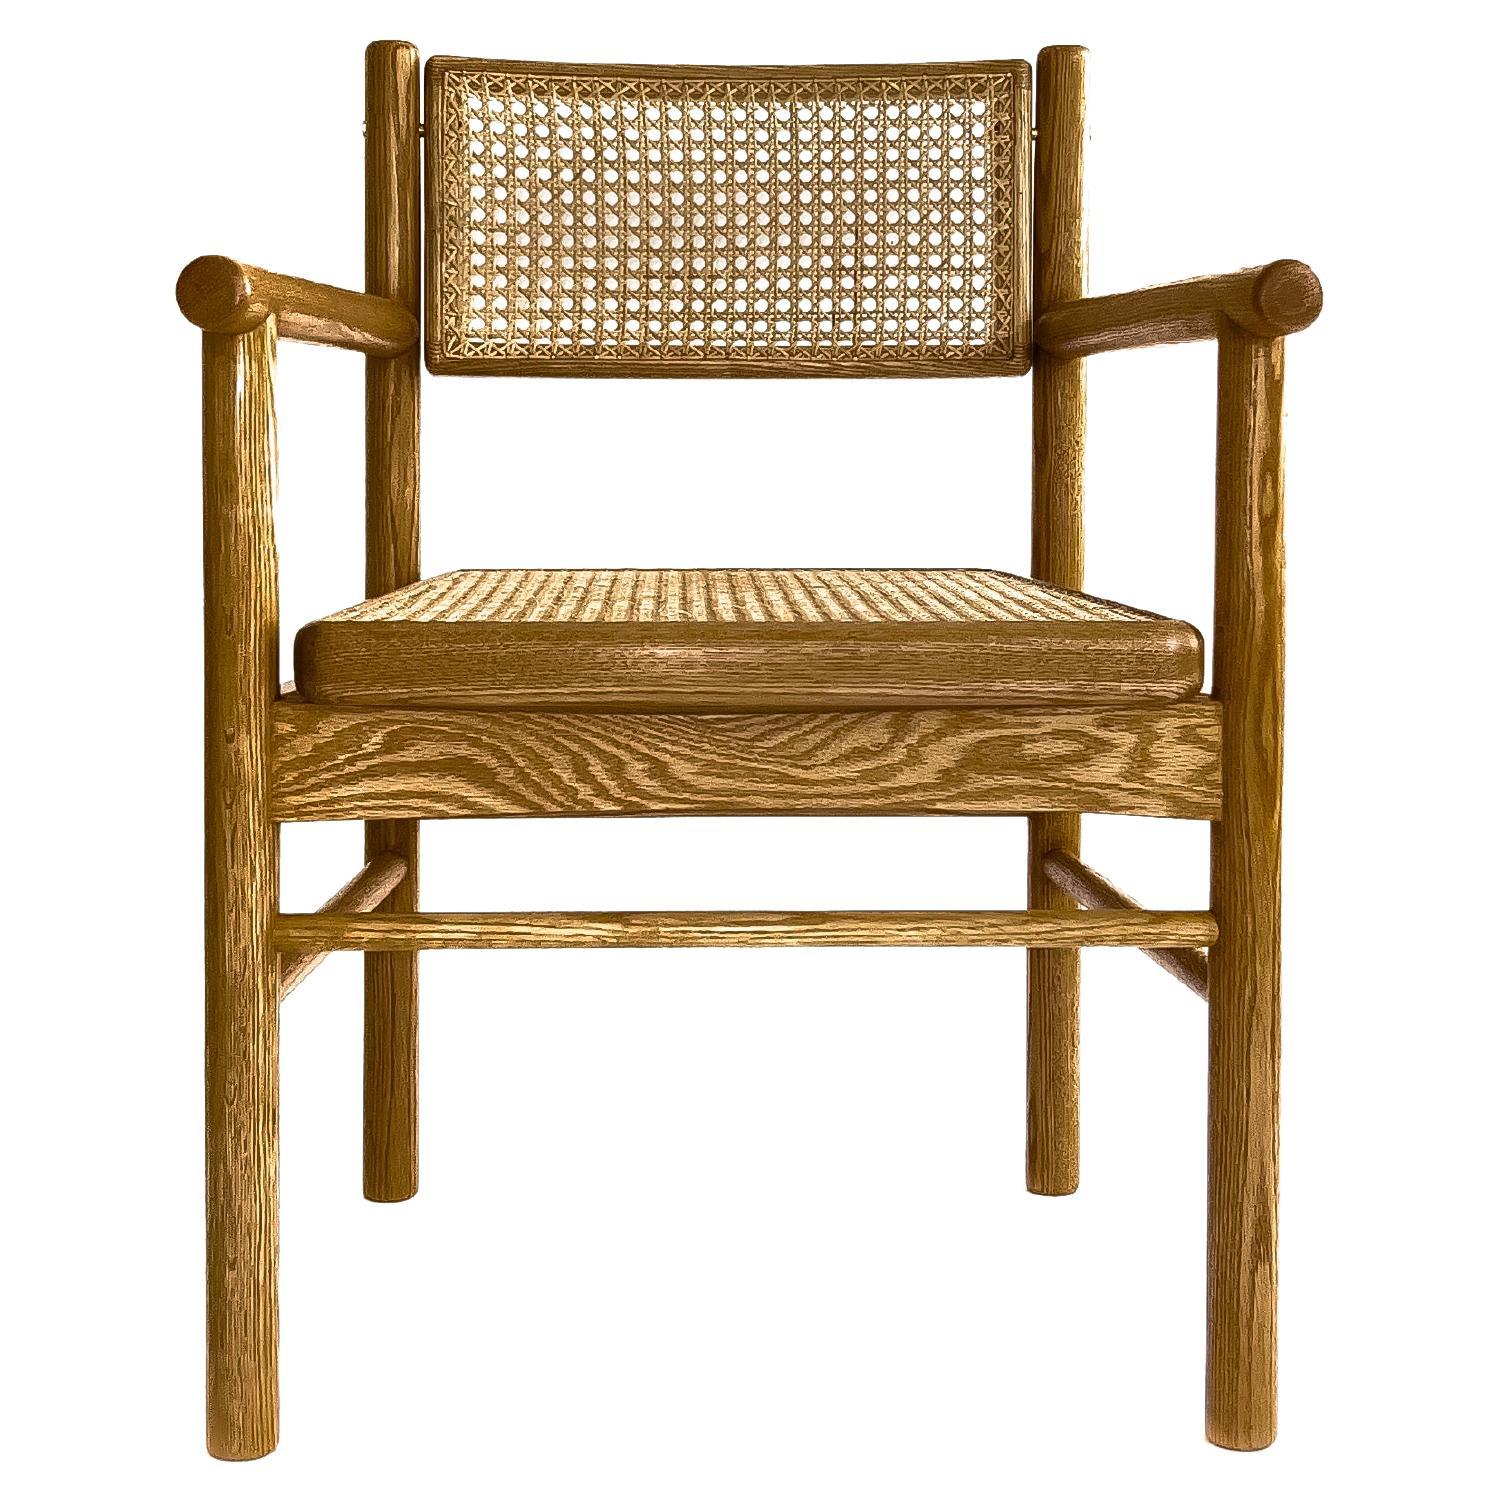 Mr. Cane,  hand canned wicker dining armchair with a self adjustable swivel back